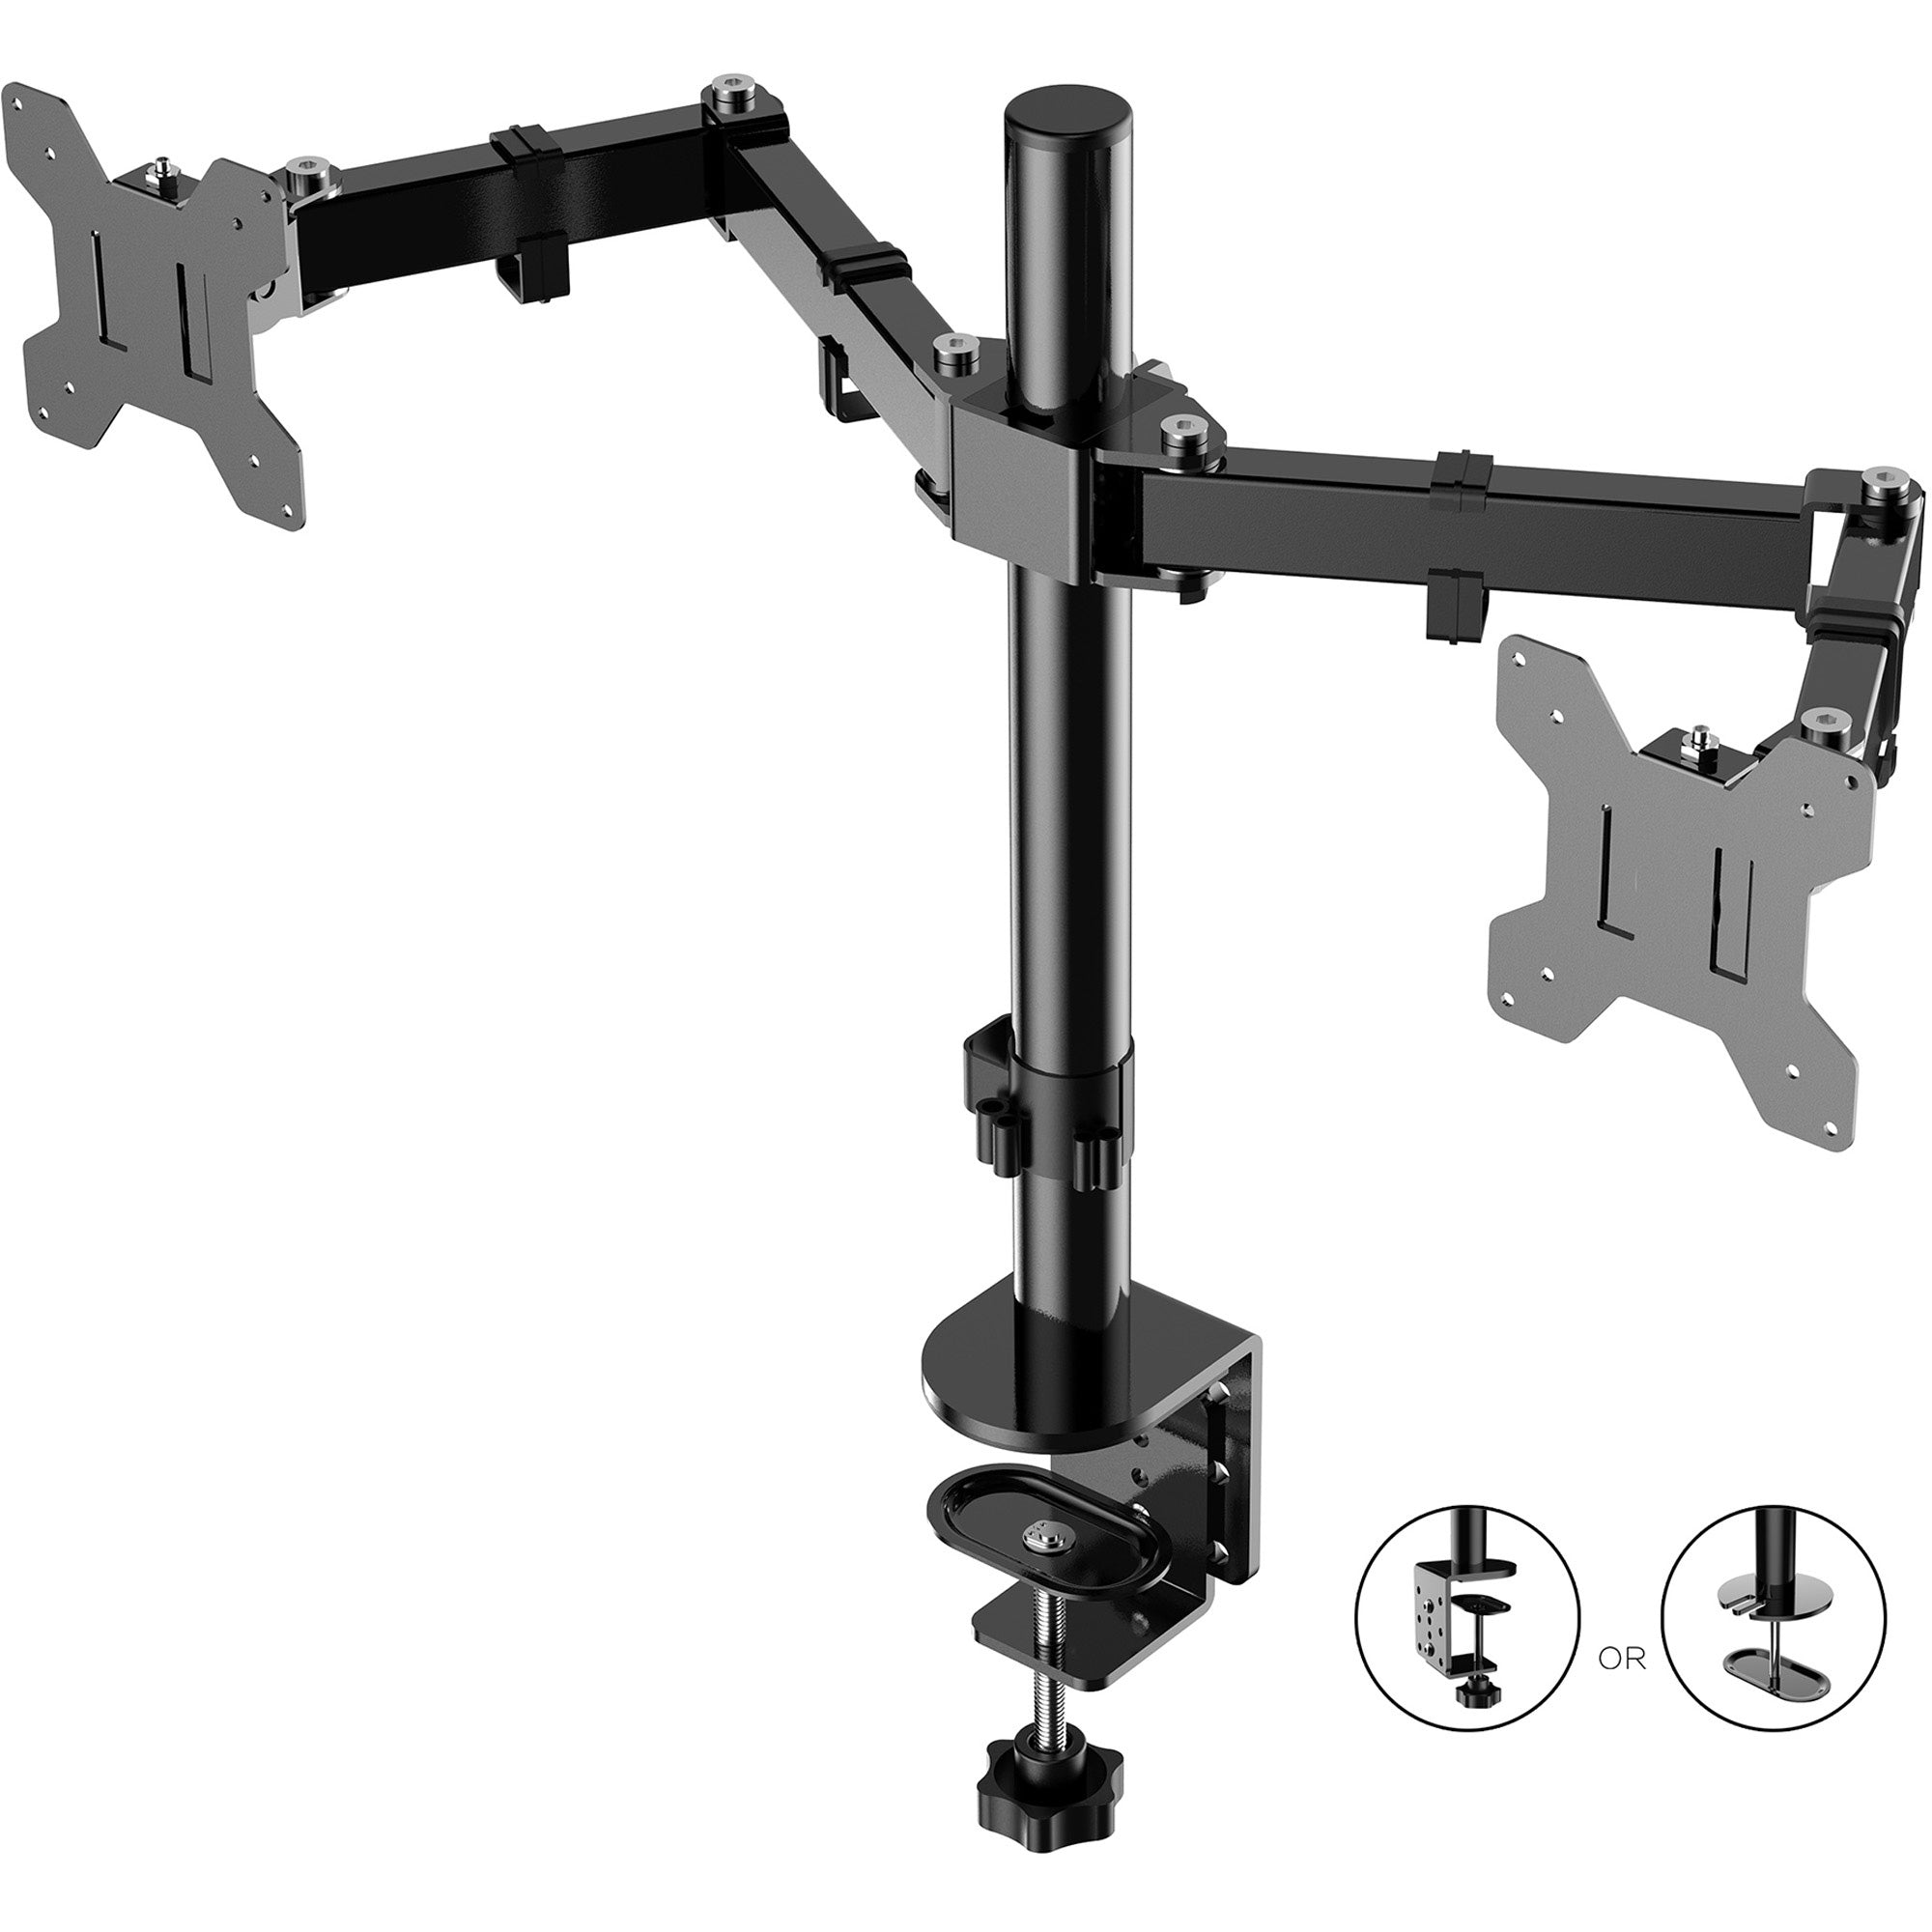 rocelco-rdm2-desk-mount-for-lcd-monitor-led-monitor-display-stand-height-adjustable-2-displays-supported-13-to-27-screen-support-3527-lb-load-capacity-75-x-75-100-x-100-vesa-mount-compatible-4-carton_rclrdm2 - 1